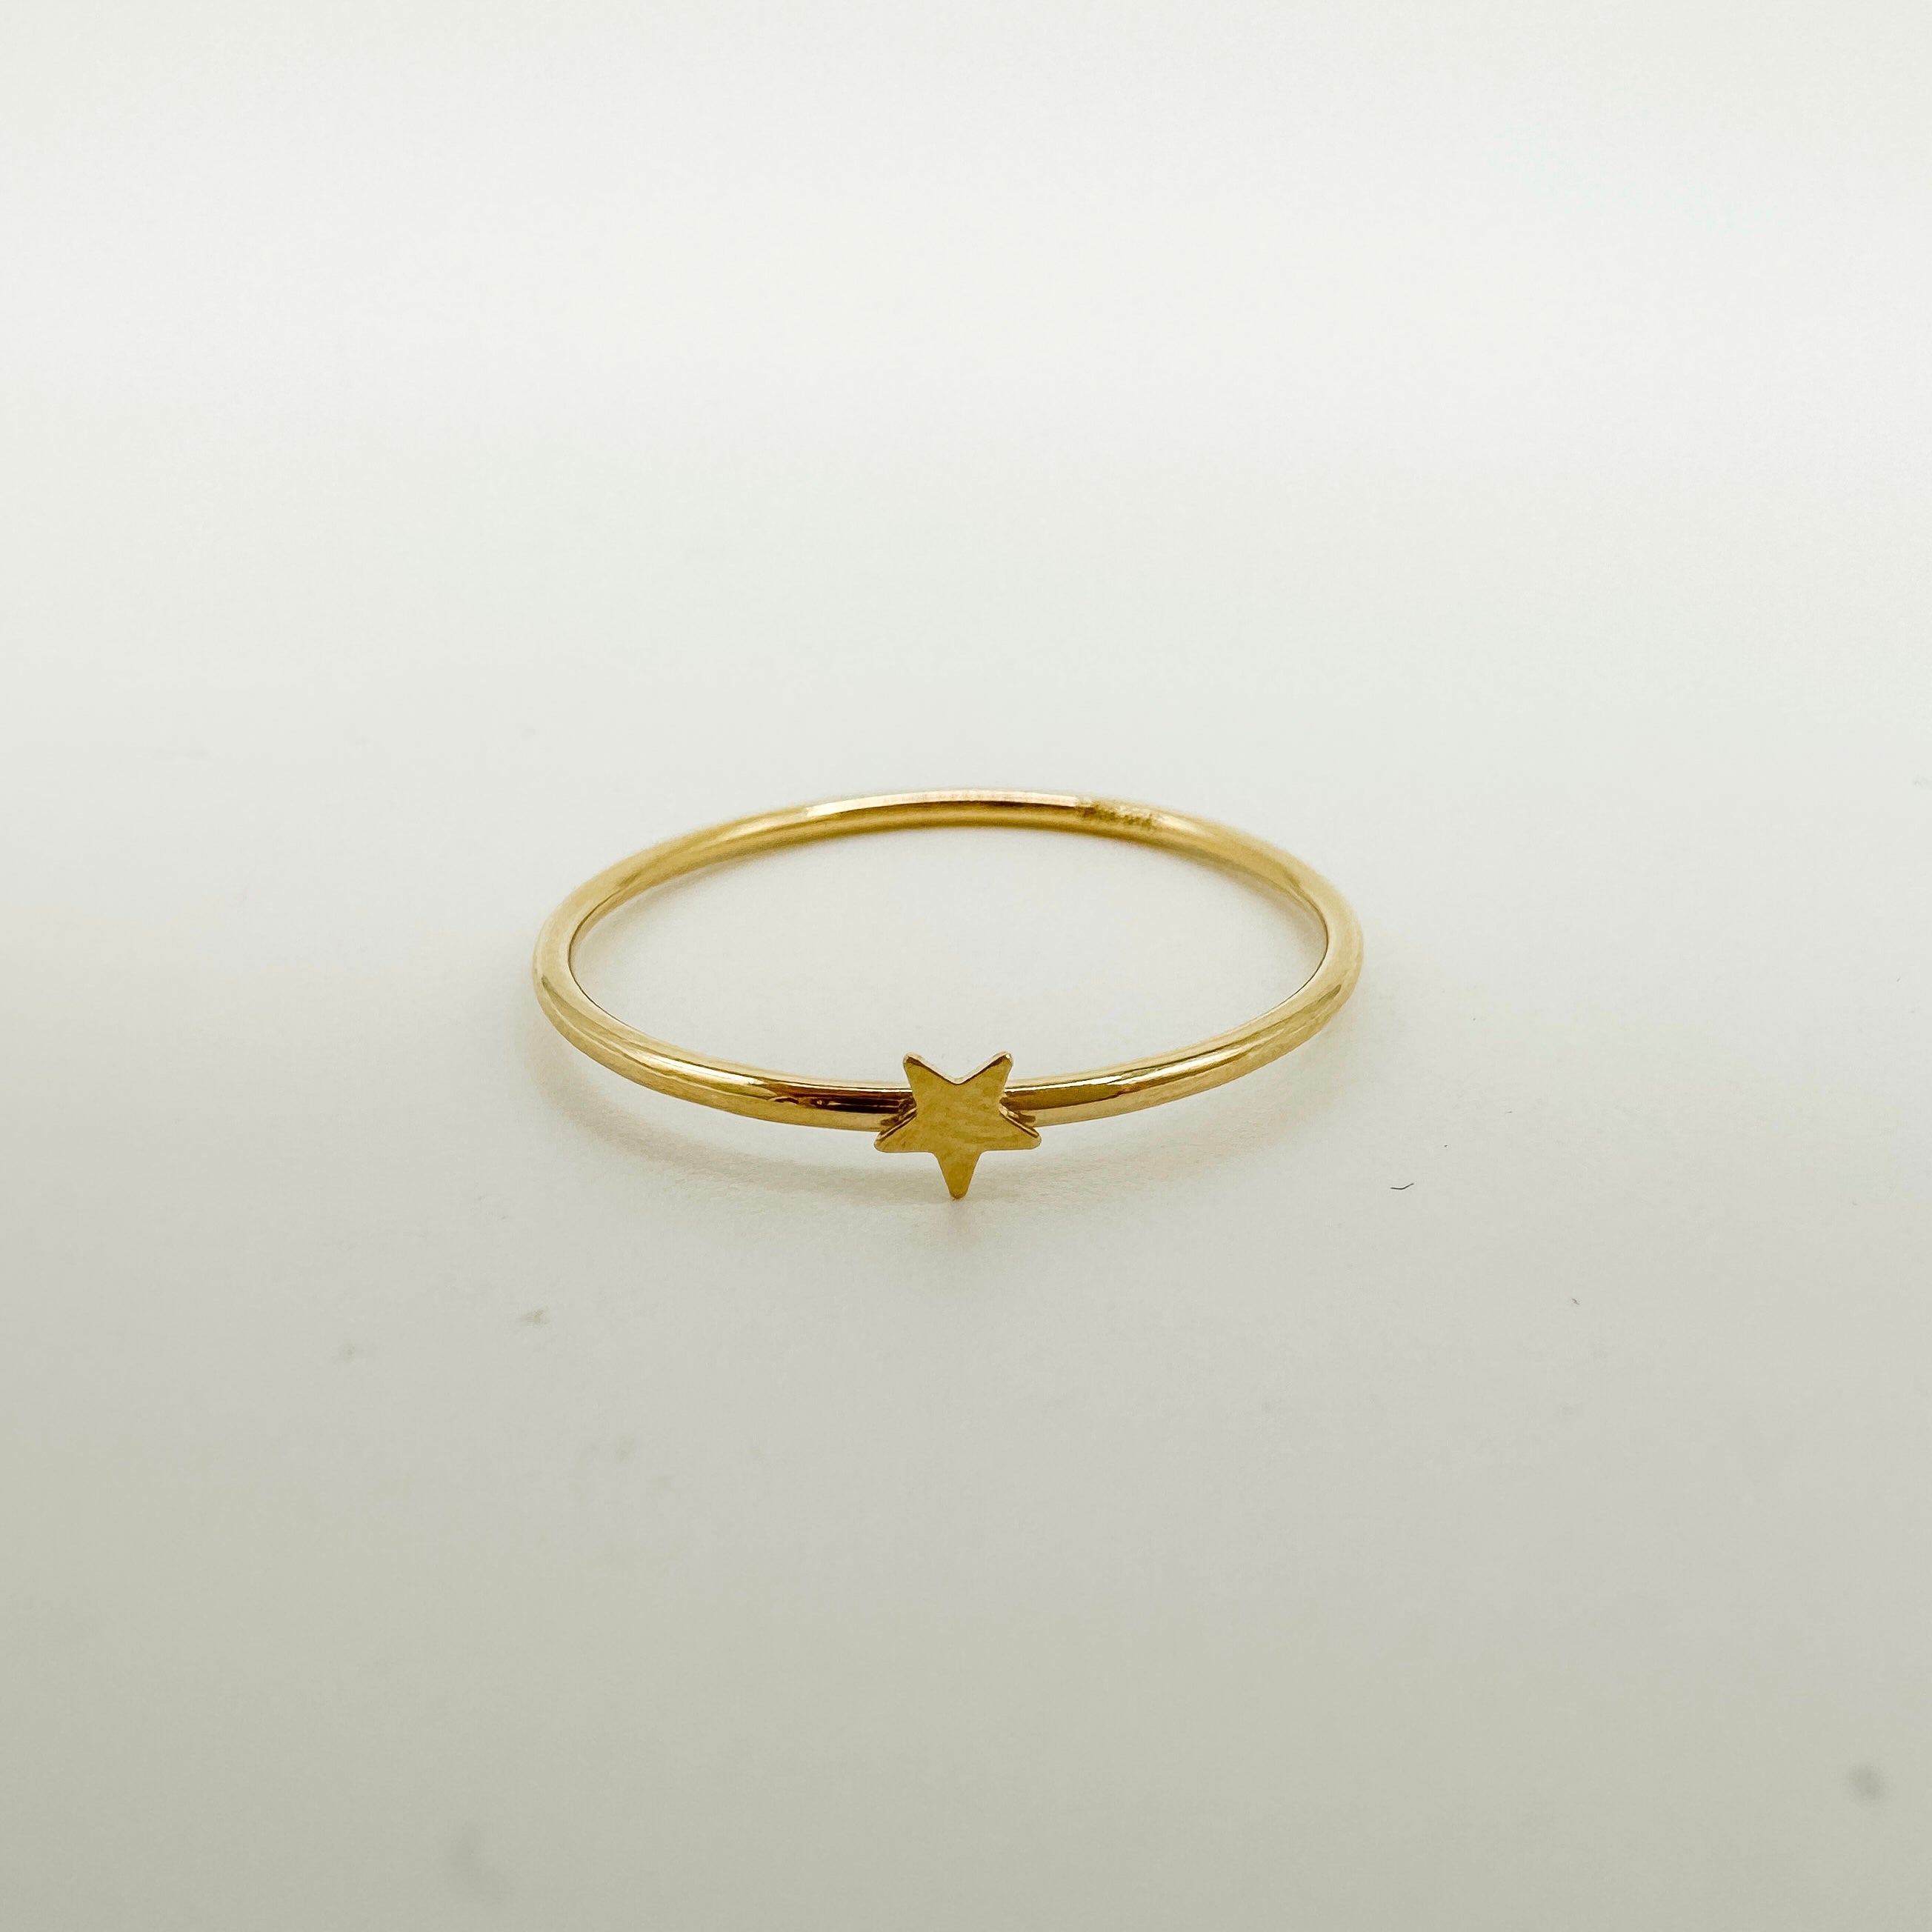 gold filled ring, star ring, gold filled star ring, stacking ring, wholesale rings, permanent jewelry rings